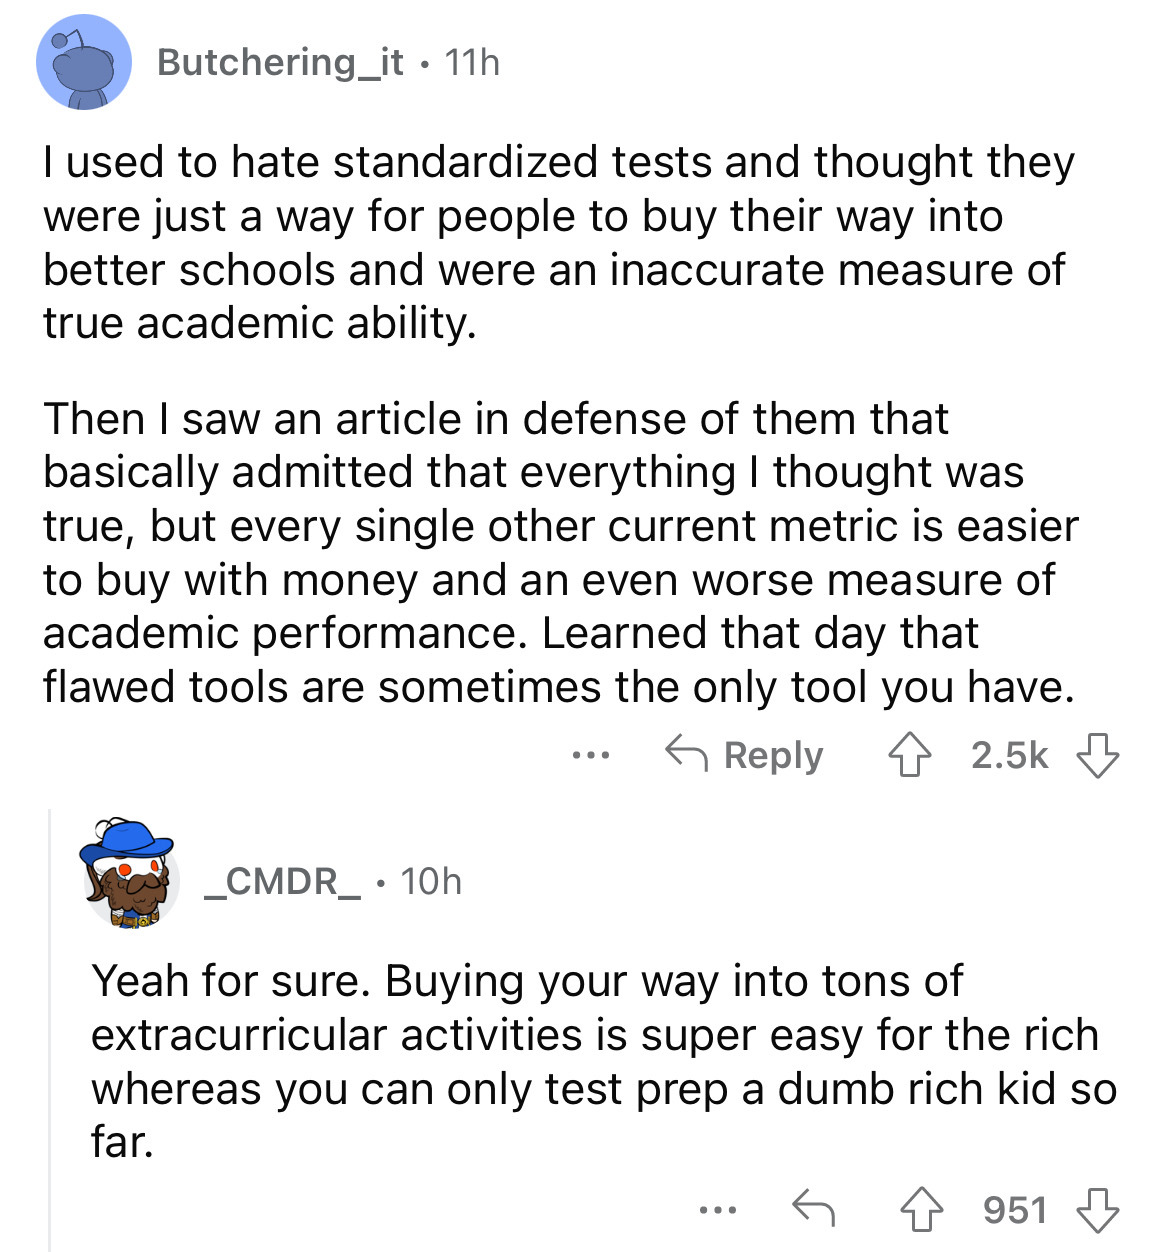 angle - Butchering_it. 11h I used to hate standardized tests and thought they were just a way for people to buy their way into better schools and were an inaccurate measure of true academic ability. Then I saw an article in defense of them that basically 